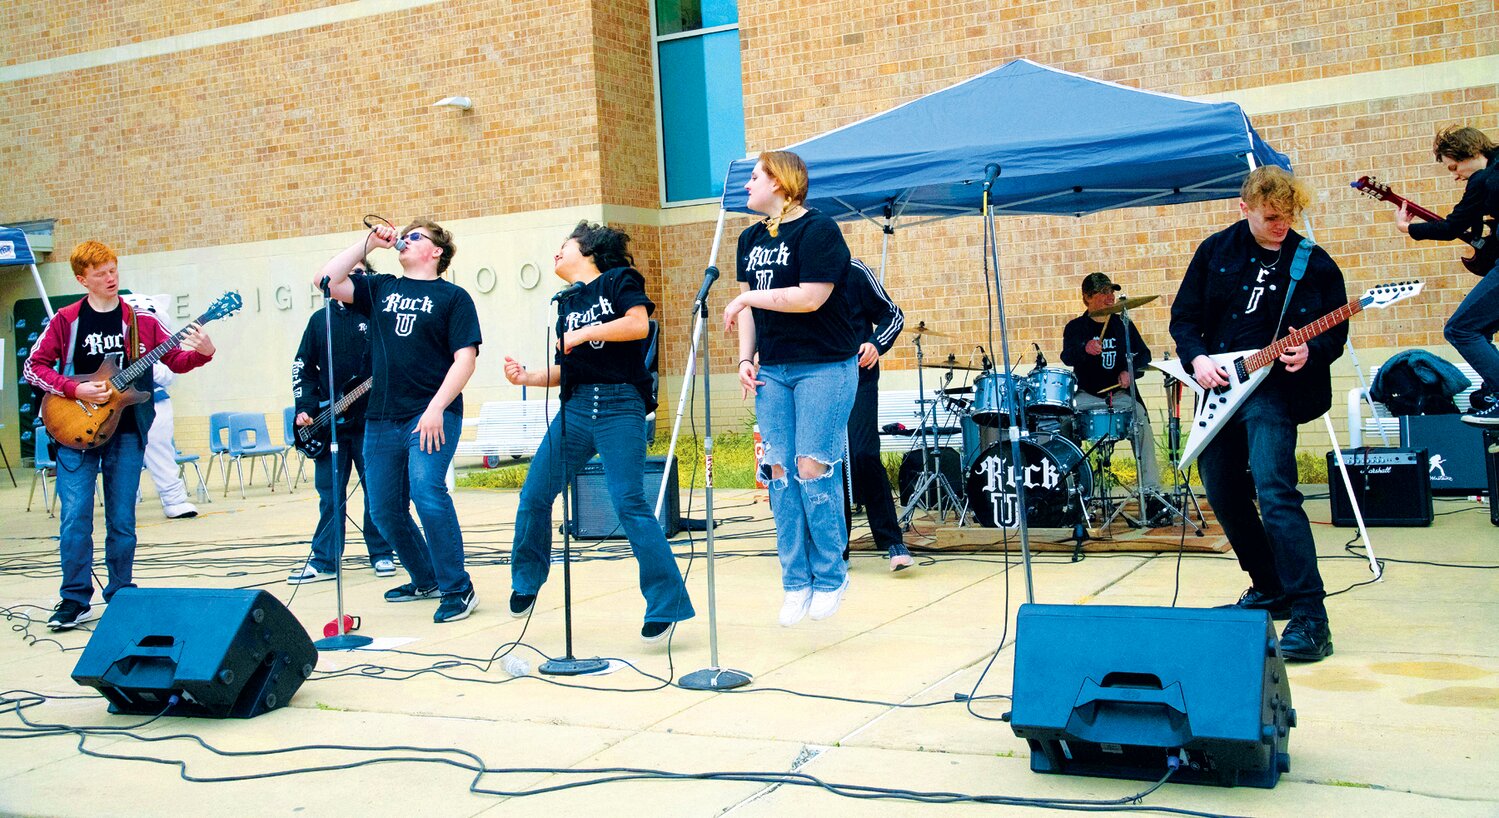 The band RockU performs during the “April Showers” event at Pennridge High School.